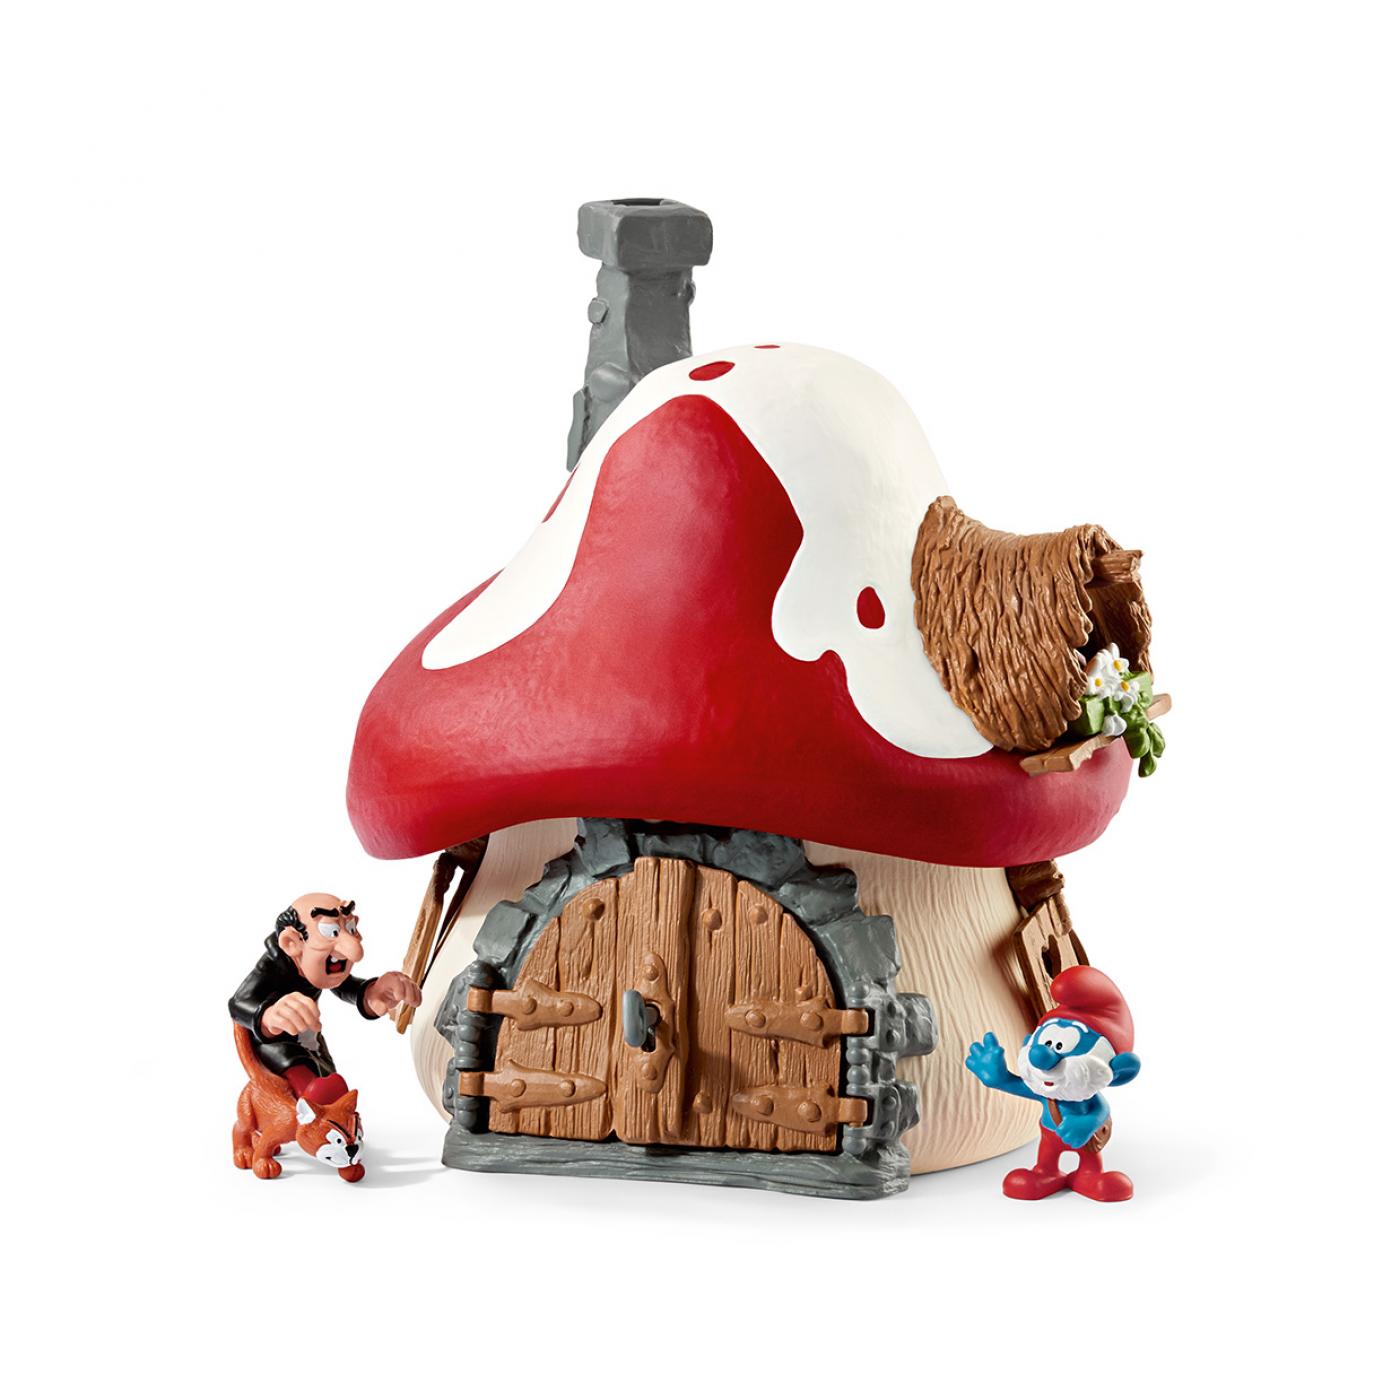 Schleich Smurf House with 2 figures 20803